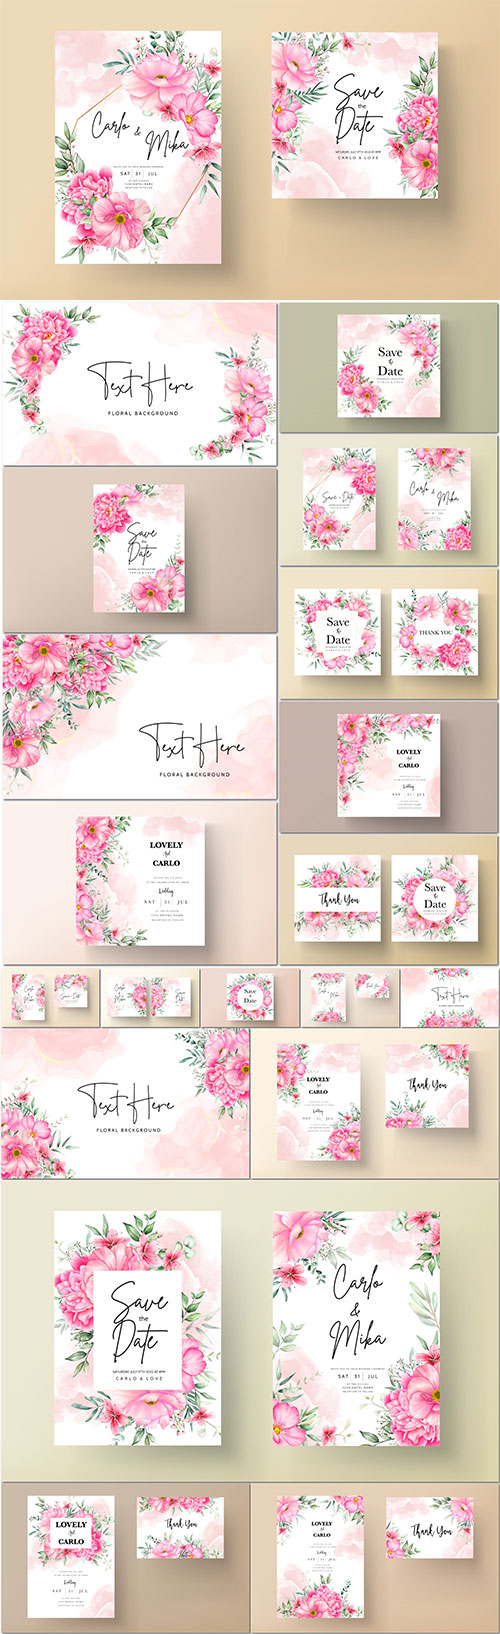 Romantic flower wedding invitation card template with hand drawing floral vector